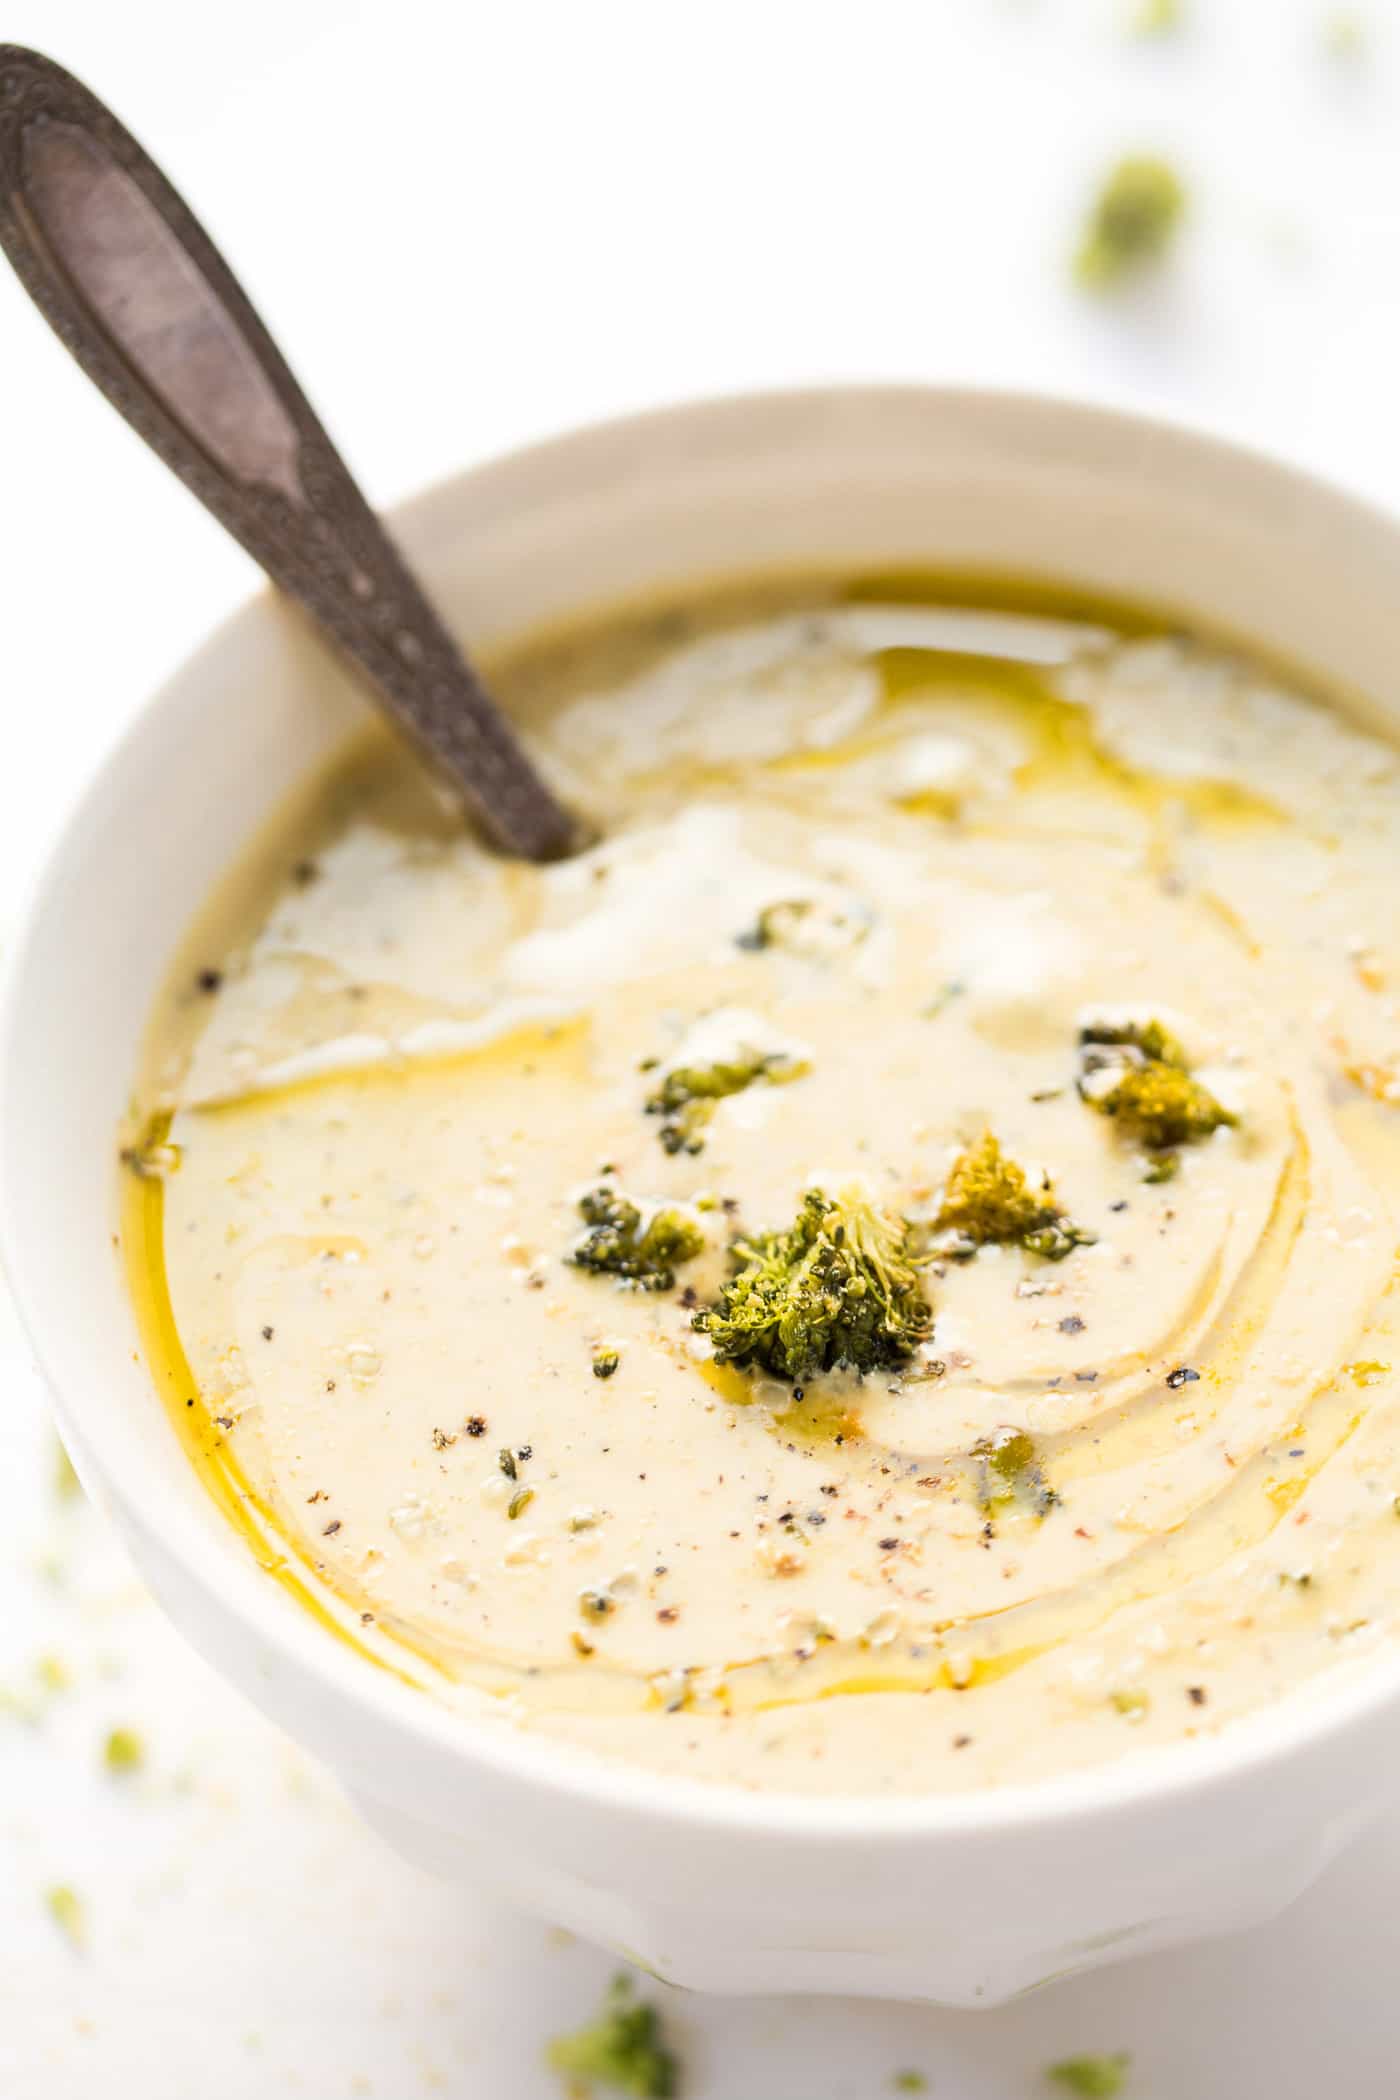 This quick broccoli chowder is made in only 30 minutes, is filled with the flavors of roasted veggies and it's high in protein, so it's satisfying and delicious!